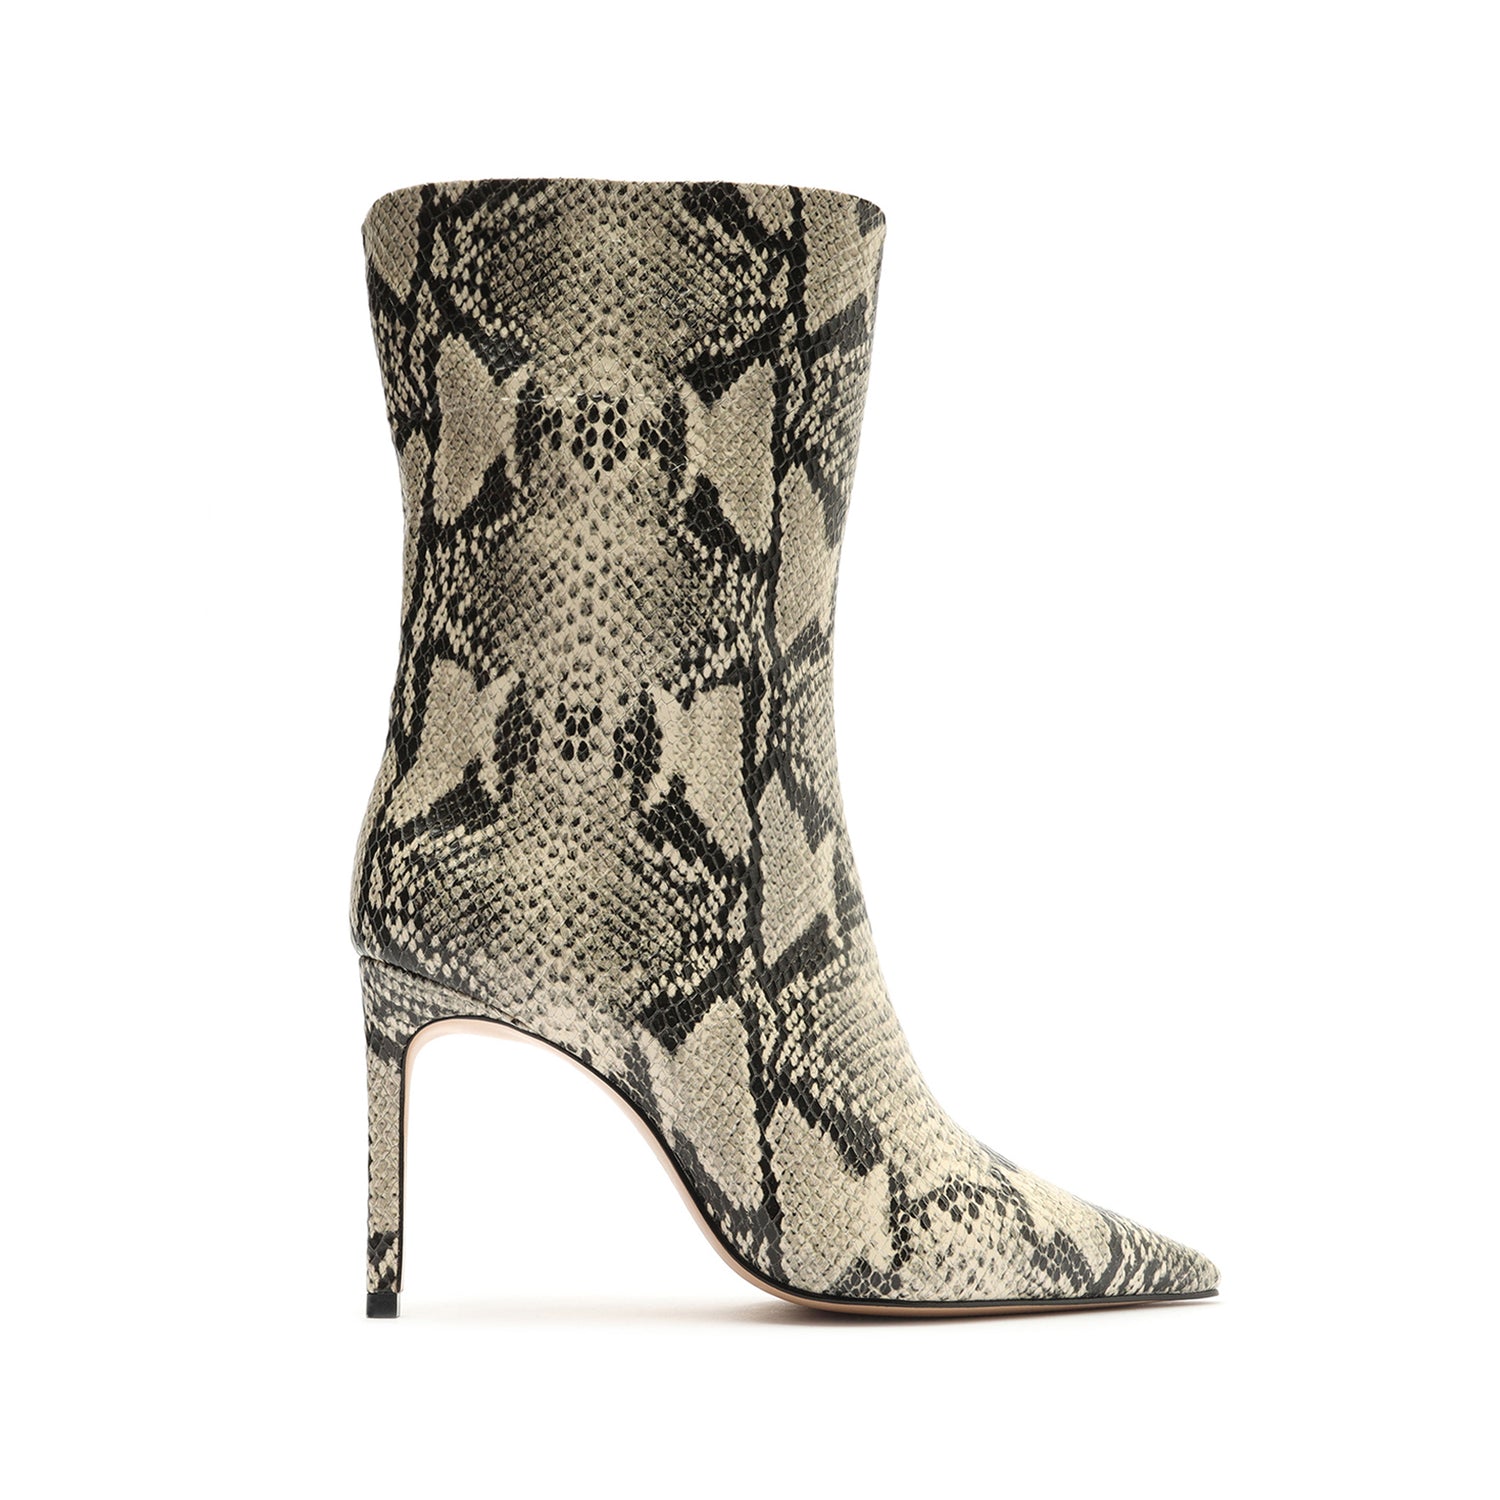 Mary Snake Embossed Leather Bootie Natural Snake Snake Embossed Leather